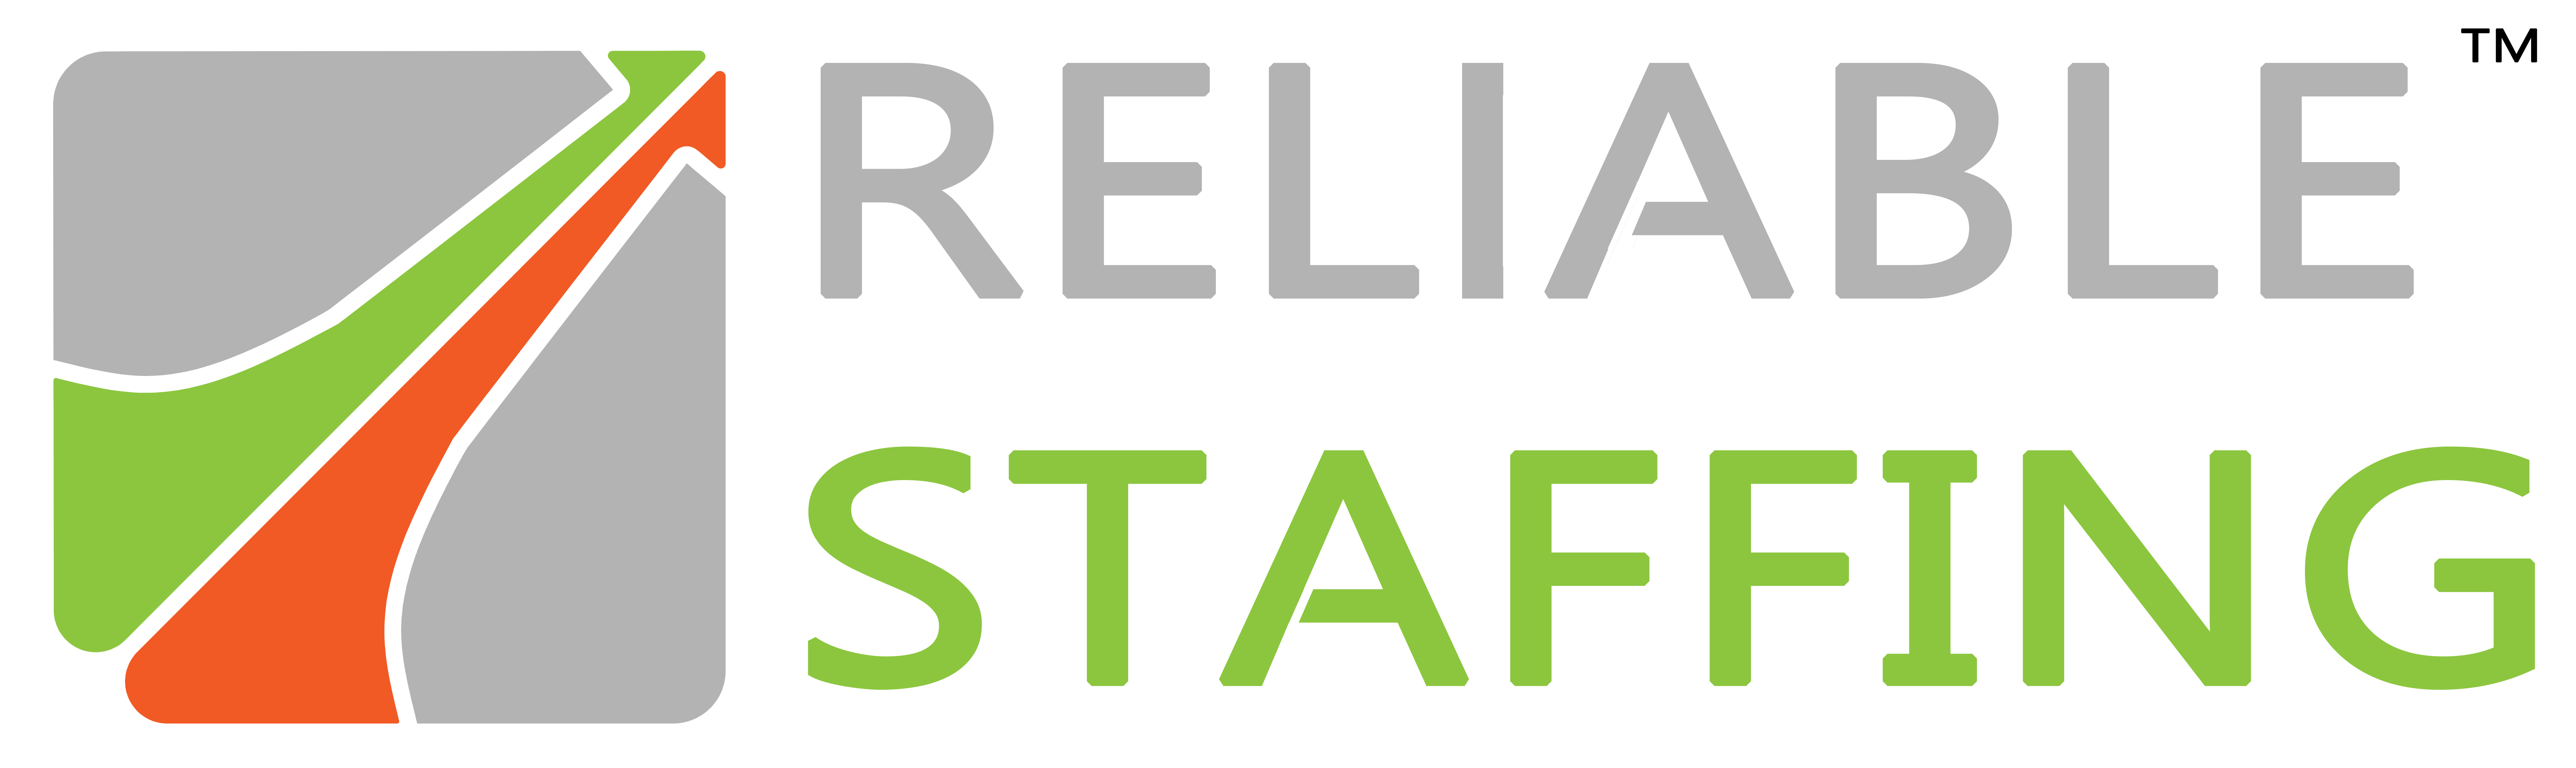 Reliable Staffing Logo